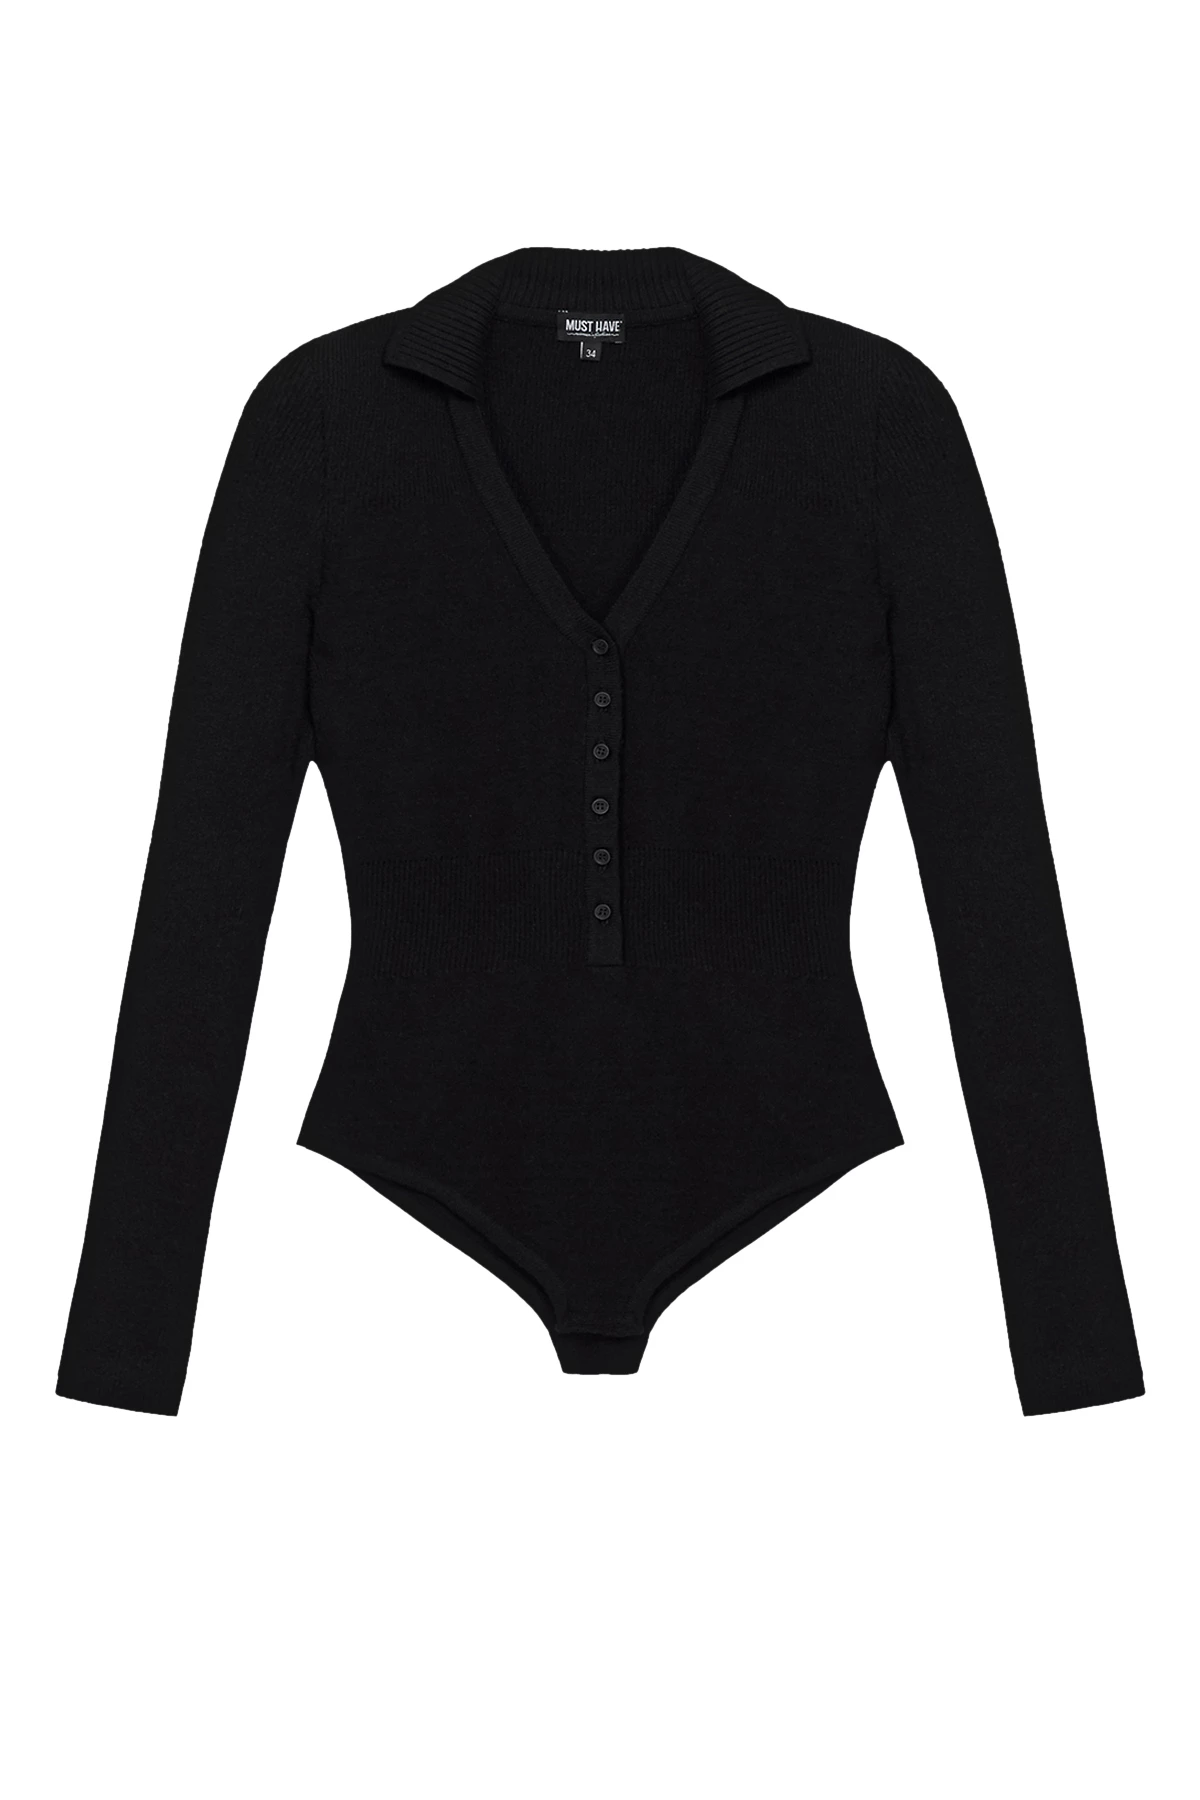 Black knitted bodysuit with viscose, photo 6